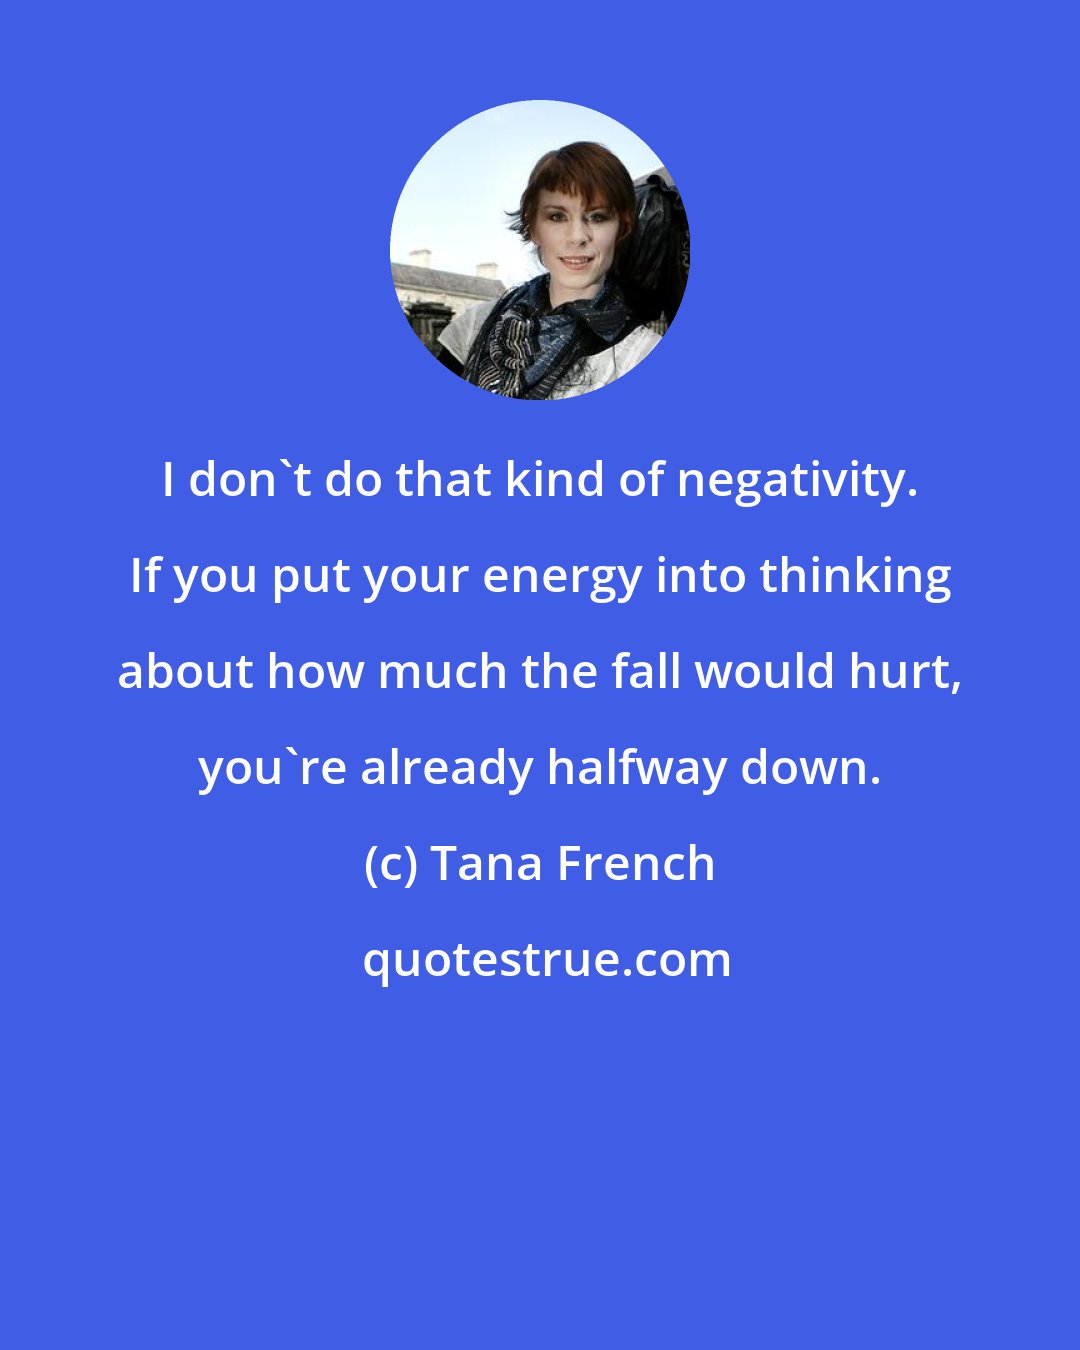 Tana French: I don't do that kind of negativity. If you put your energy into thinking about how much the fall would hurt, you're already halfway down.